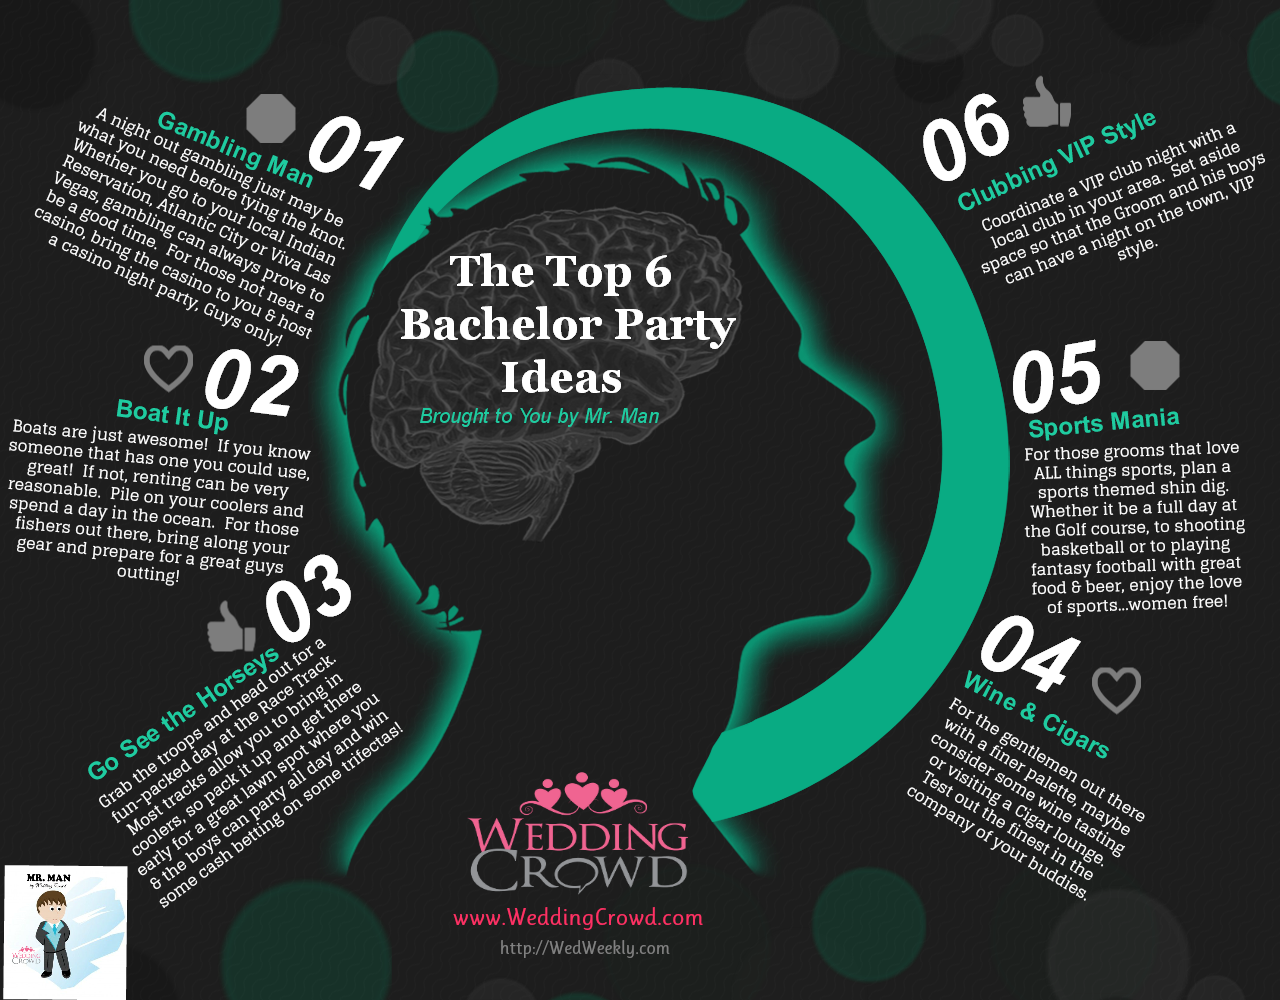 Tips For Planning an Epic Bachelor Party in Vegas